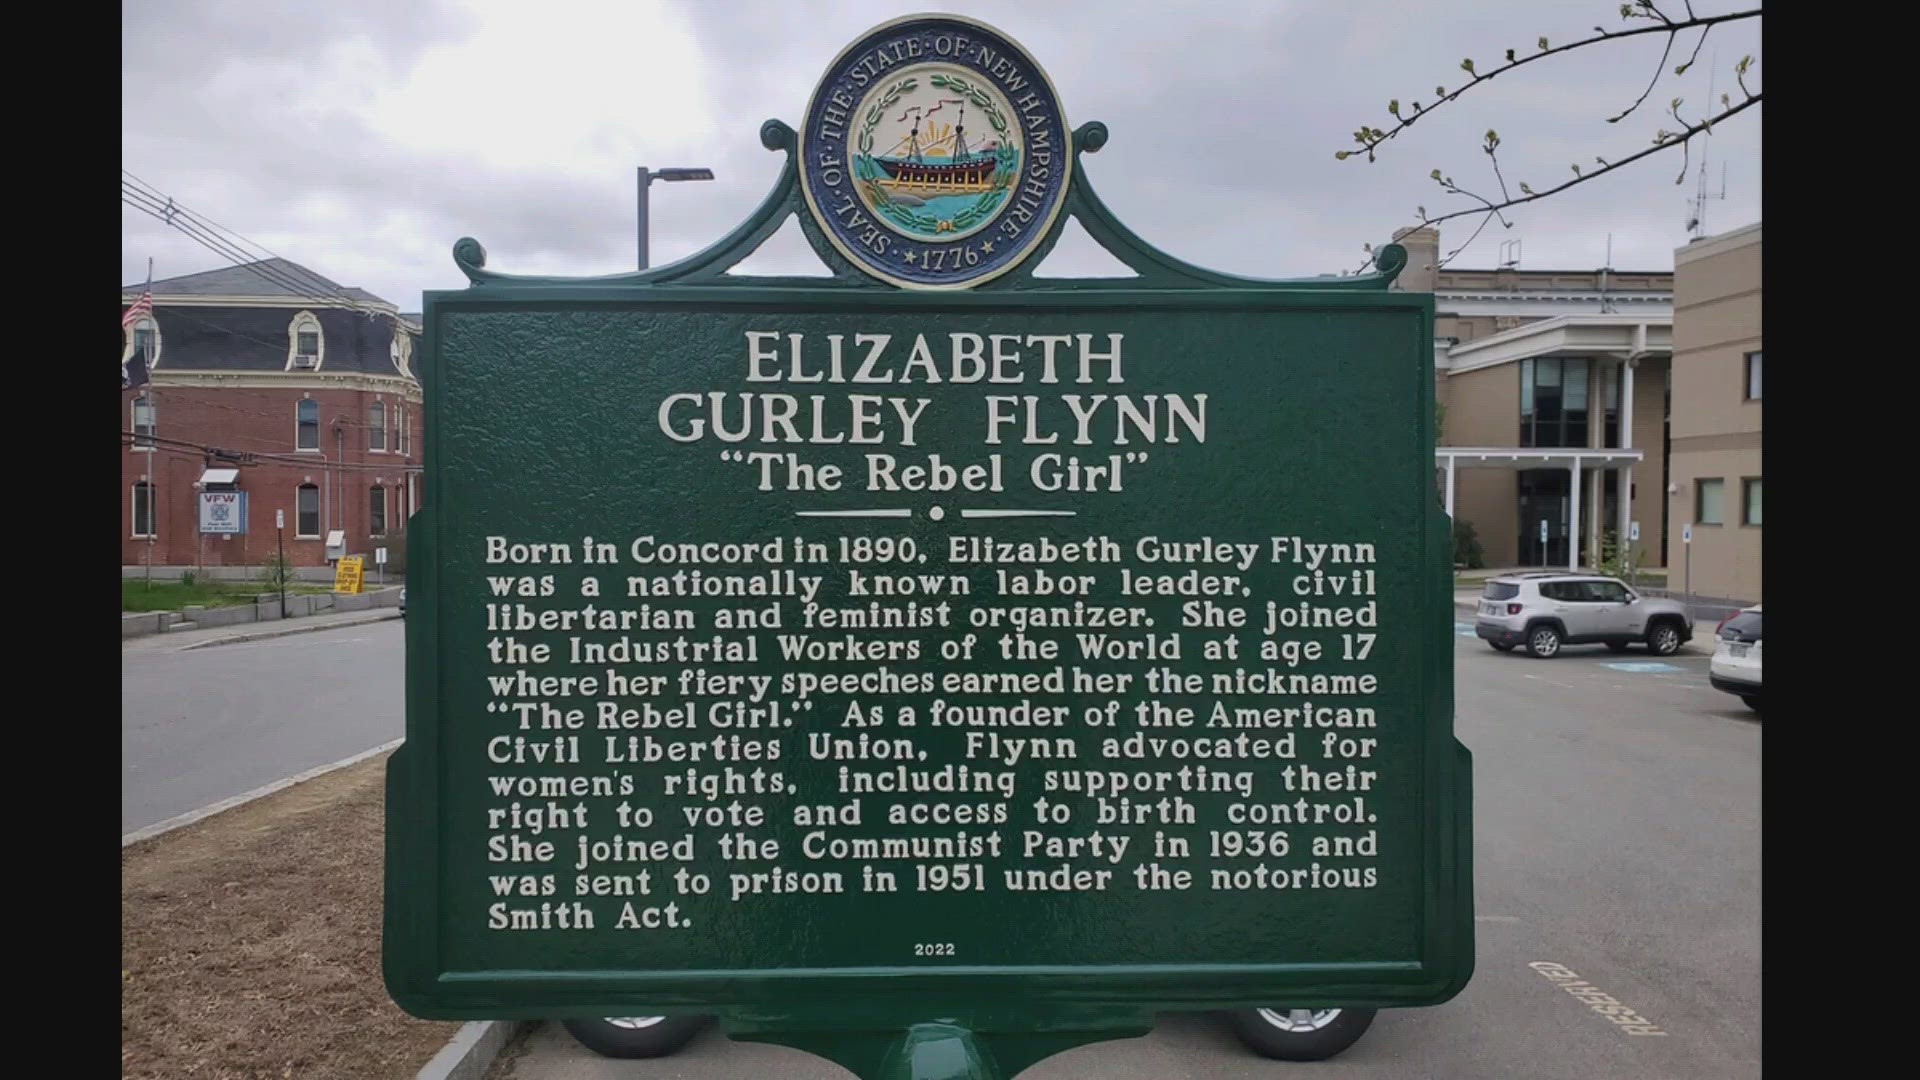 A historical marker dedicated to a feminist and labor activist in New Hampshire who also led the Communist Party was removed just two weeks after it was unveiled.